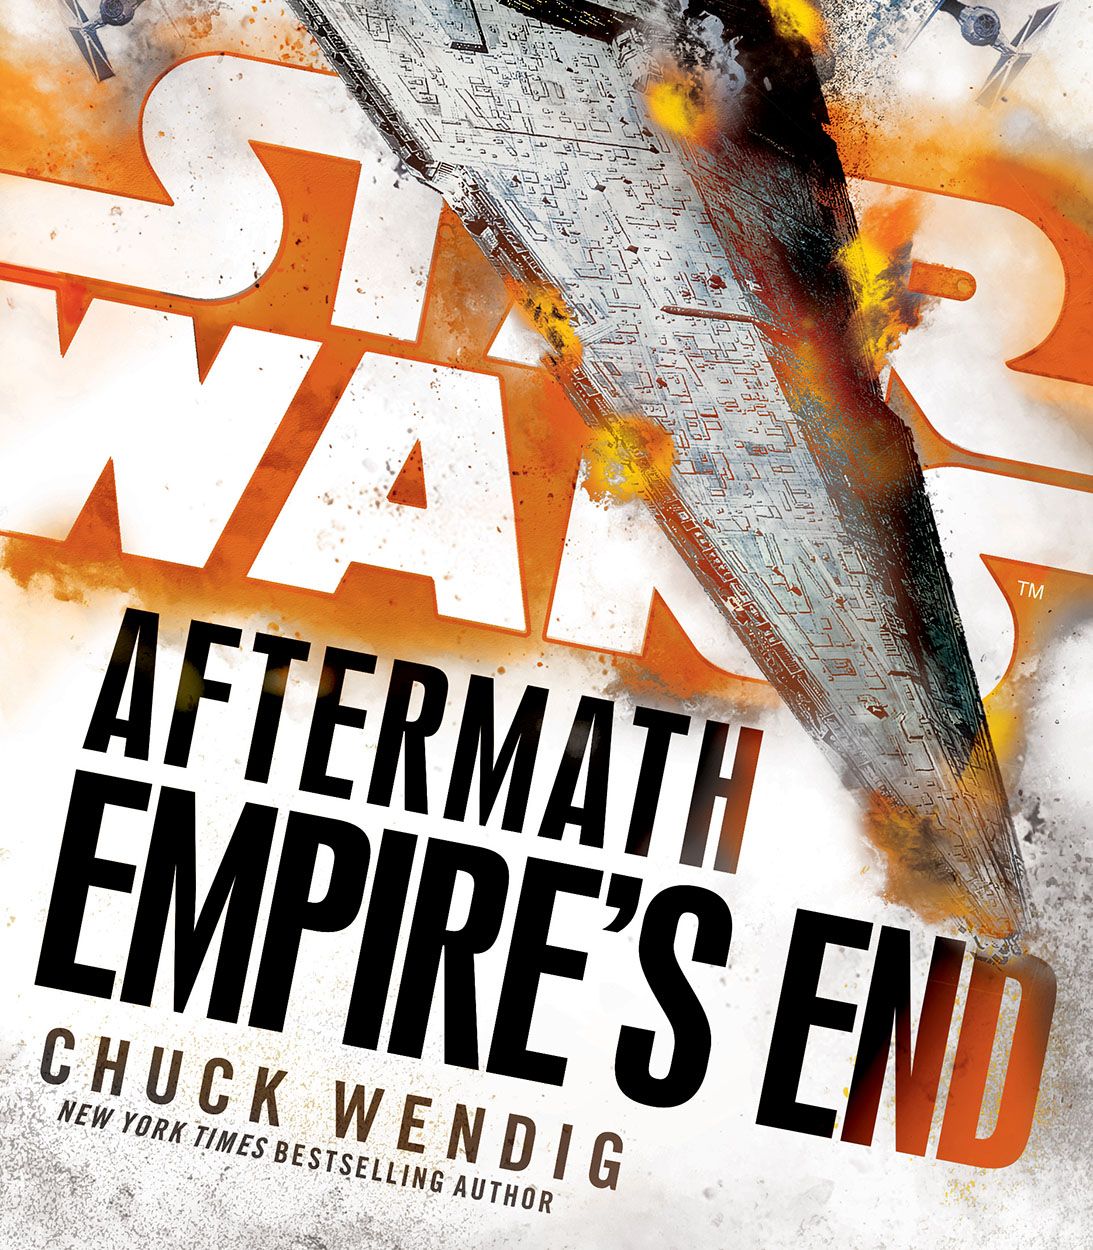 Star Wars Aftermath Empire's End vertical